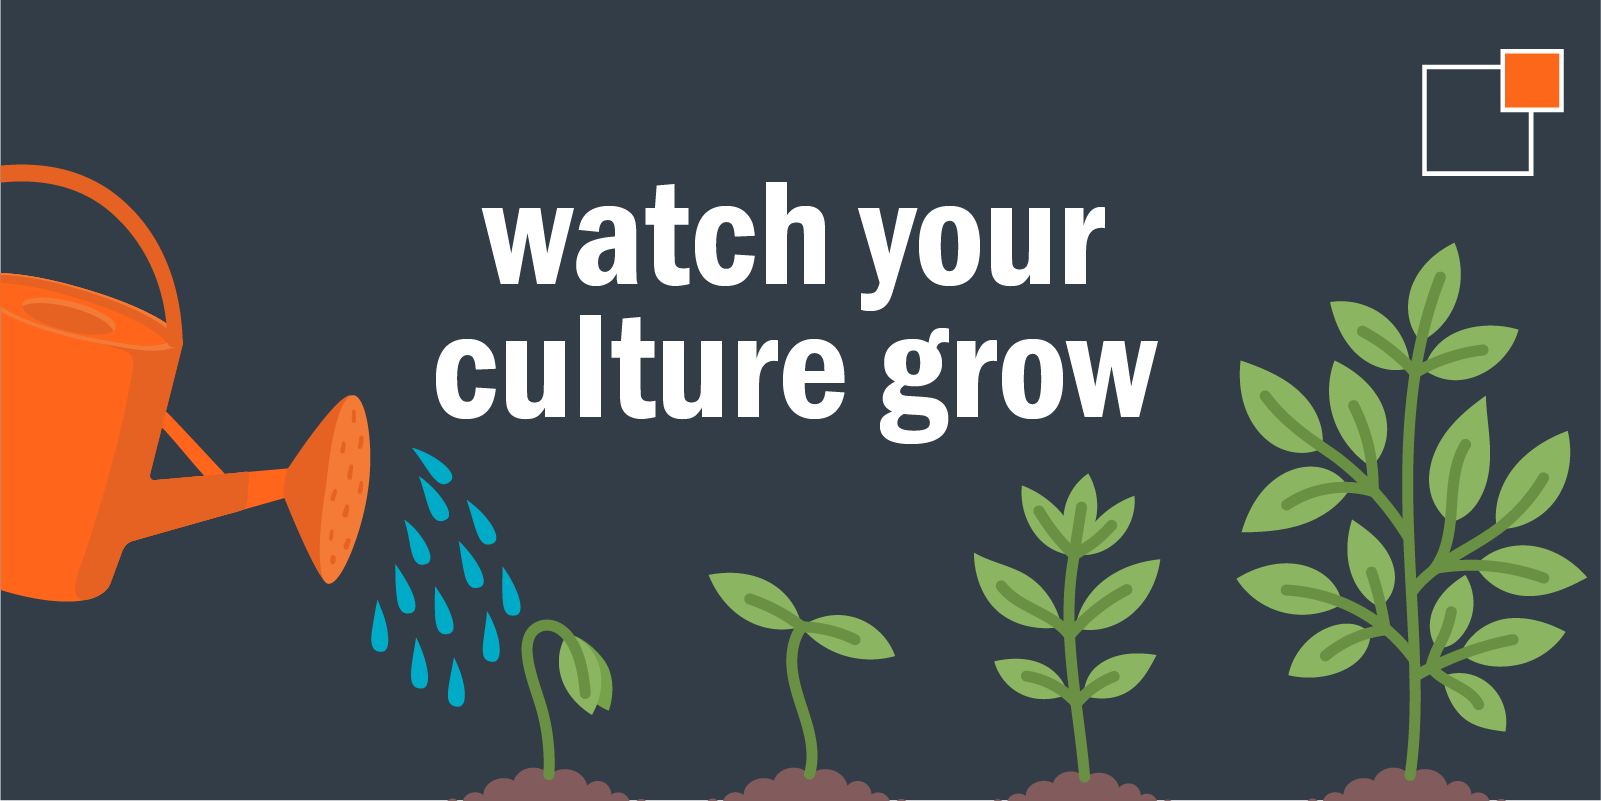 Watch your culture grow with graphics of a watering can watering plants